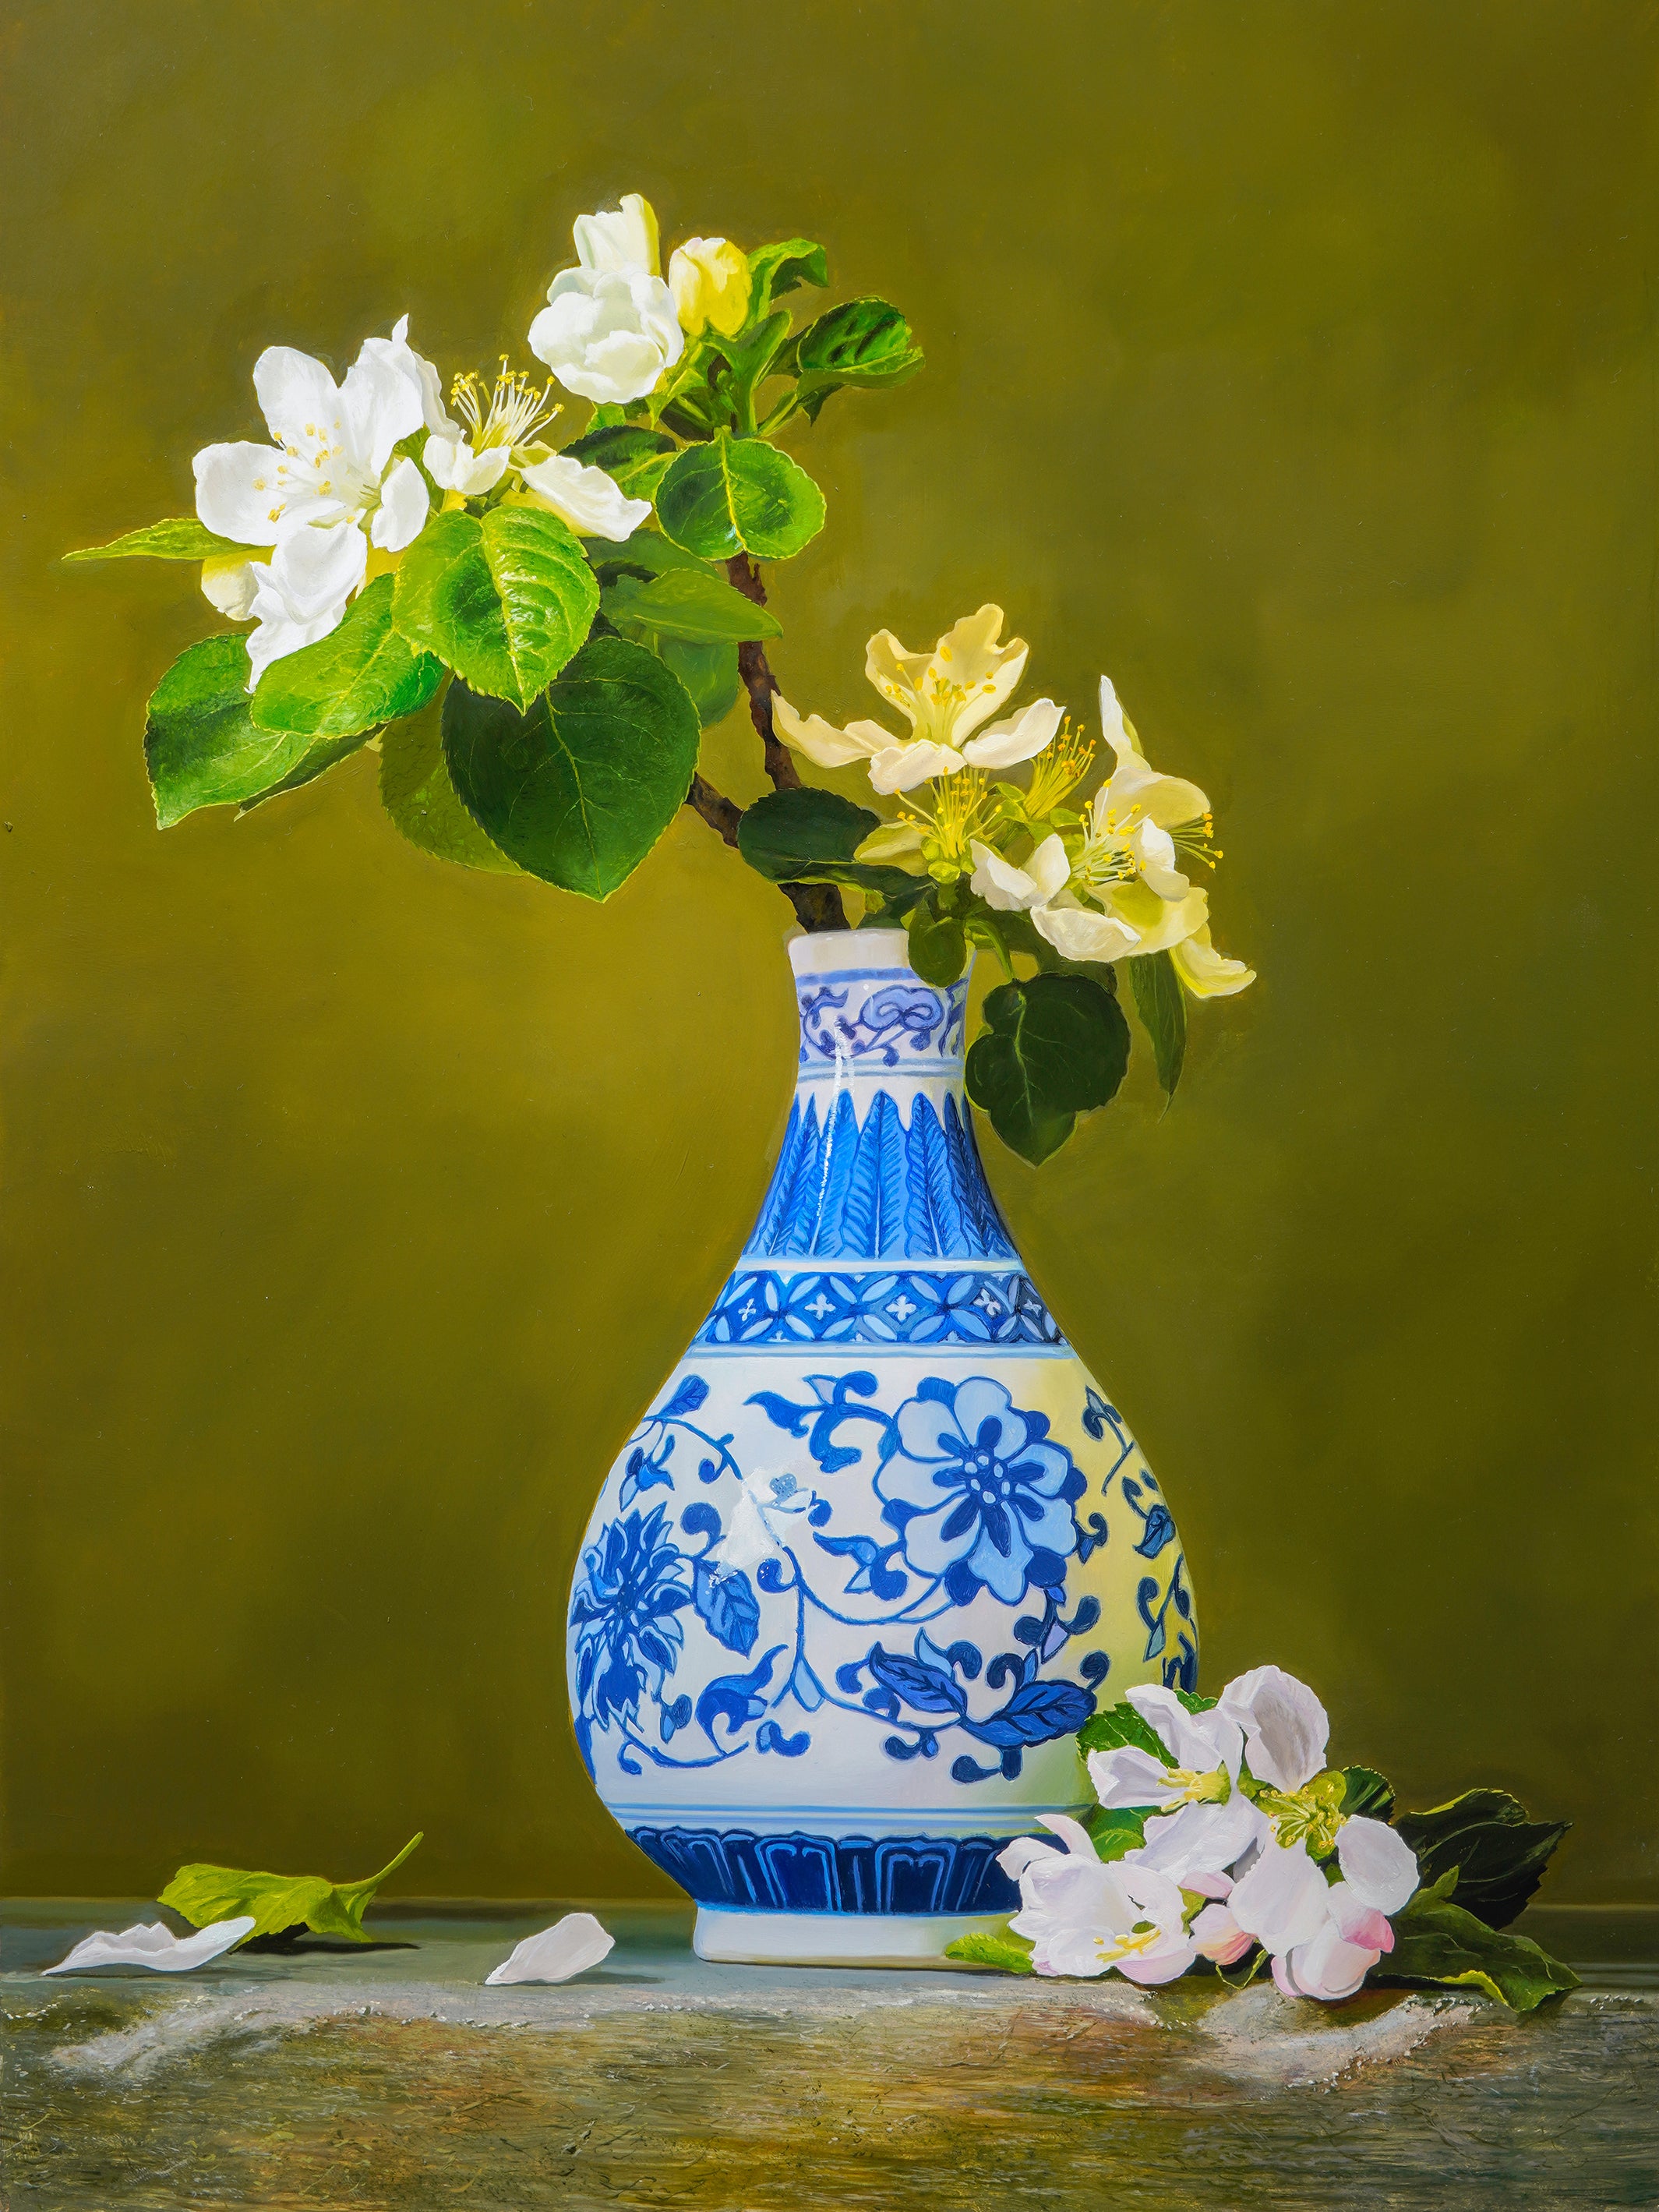 "Vase with Apple Blossom"  Original Oil Painting